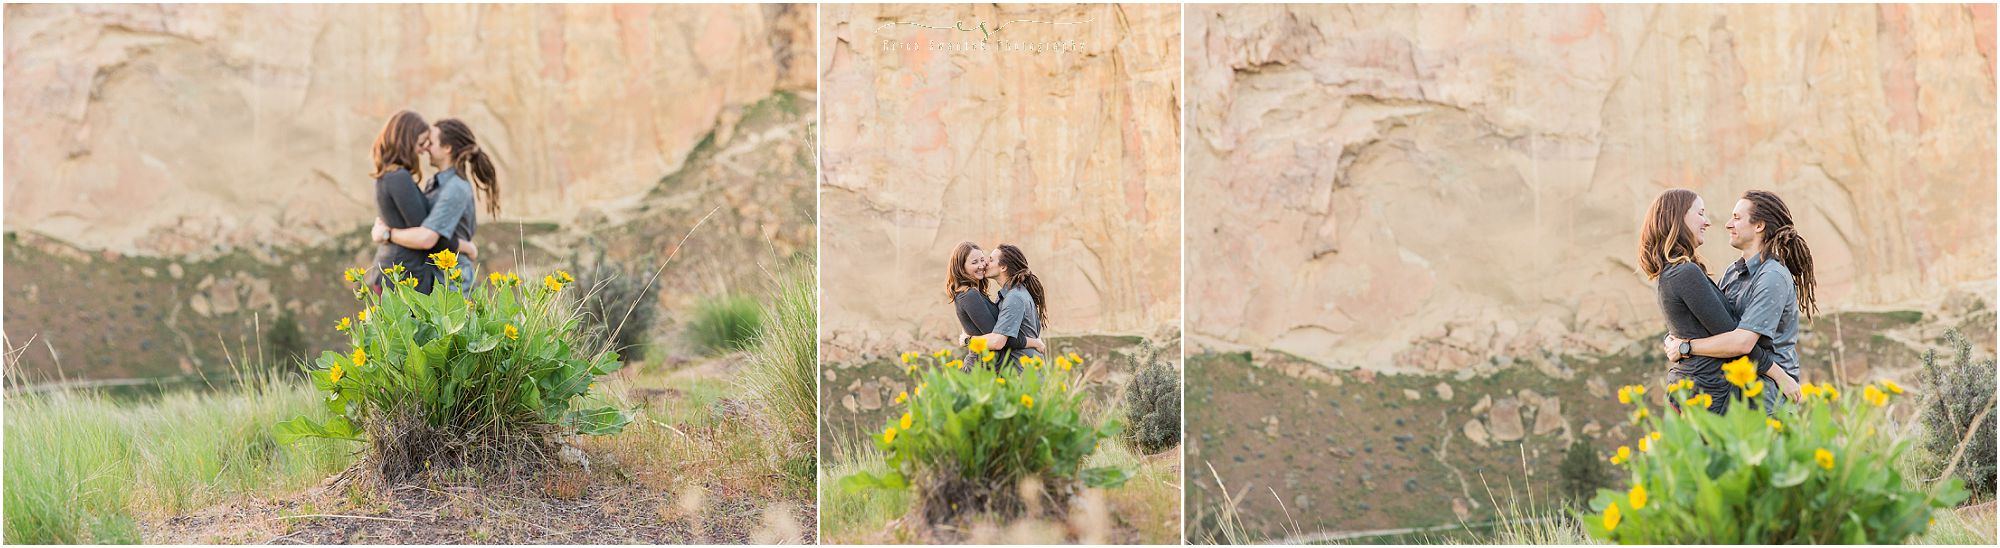 A beautiful Arrowleaf Balsamwood flower at this couple's Smith Rock engagement session in Terrebonne, OR. | Erica Swantek Photography